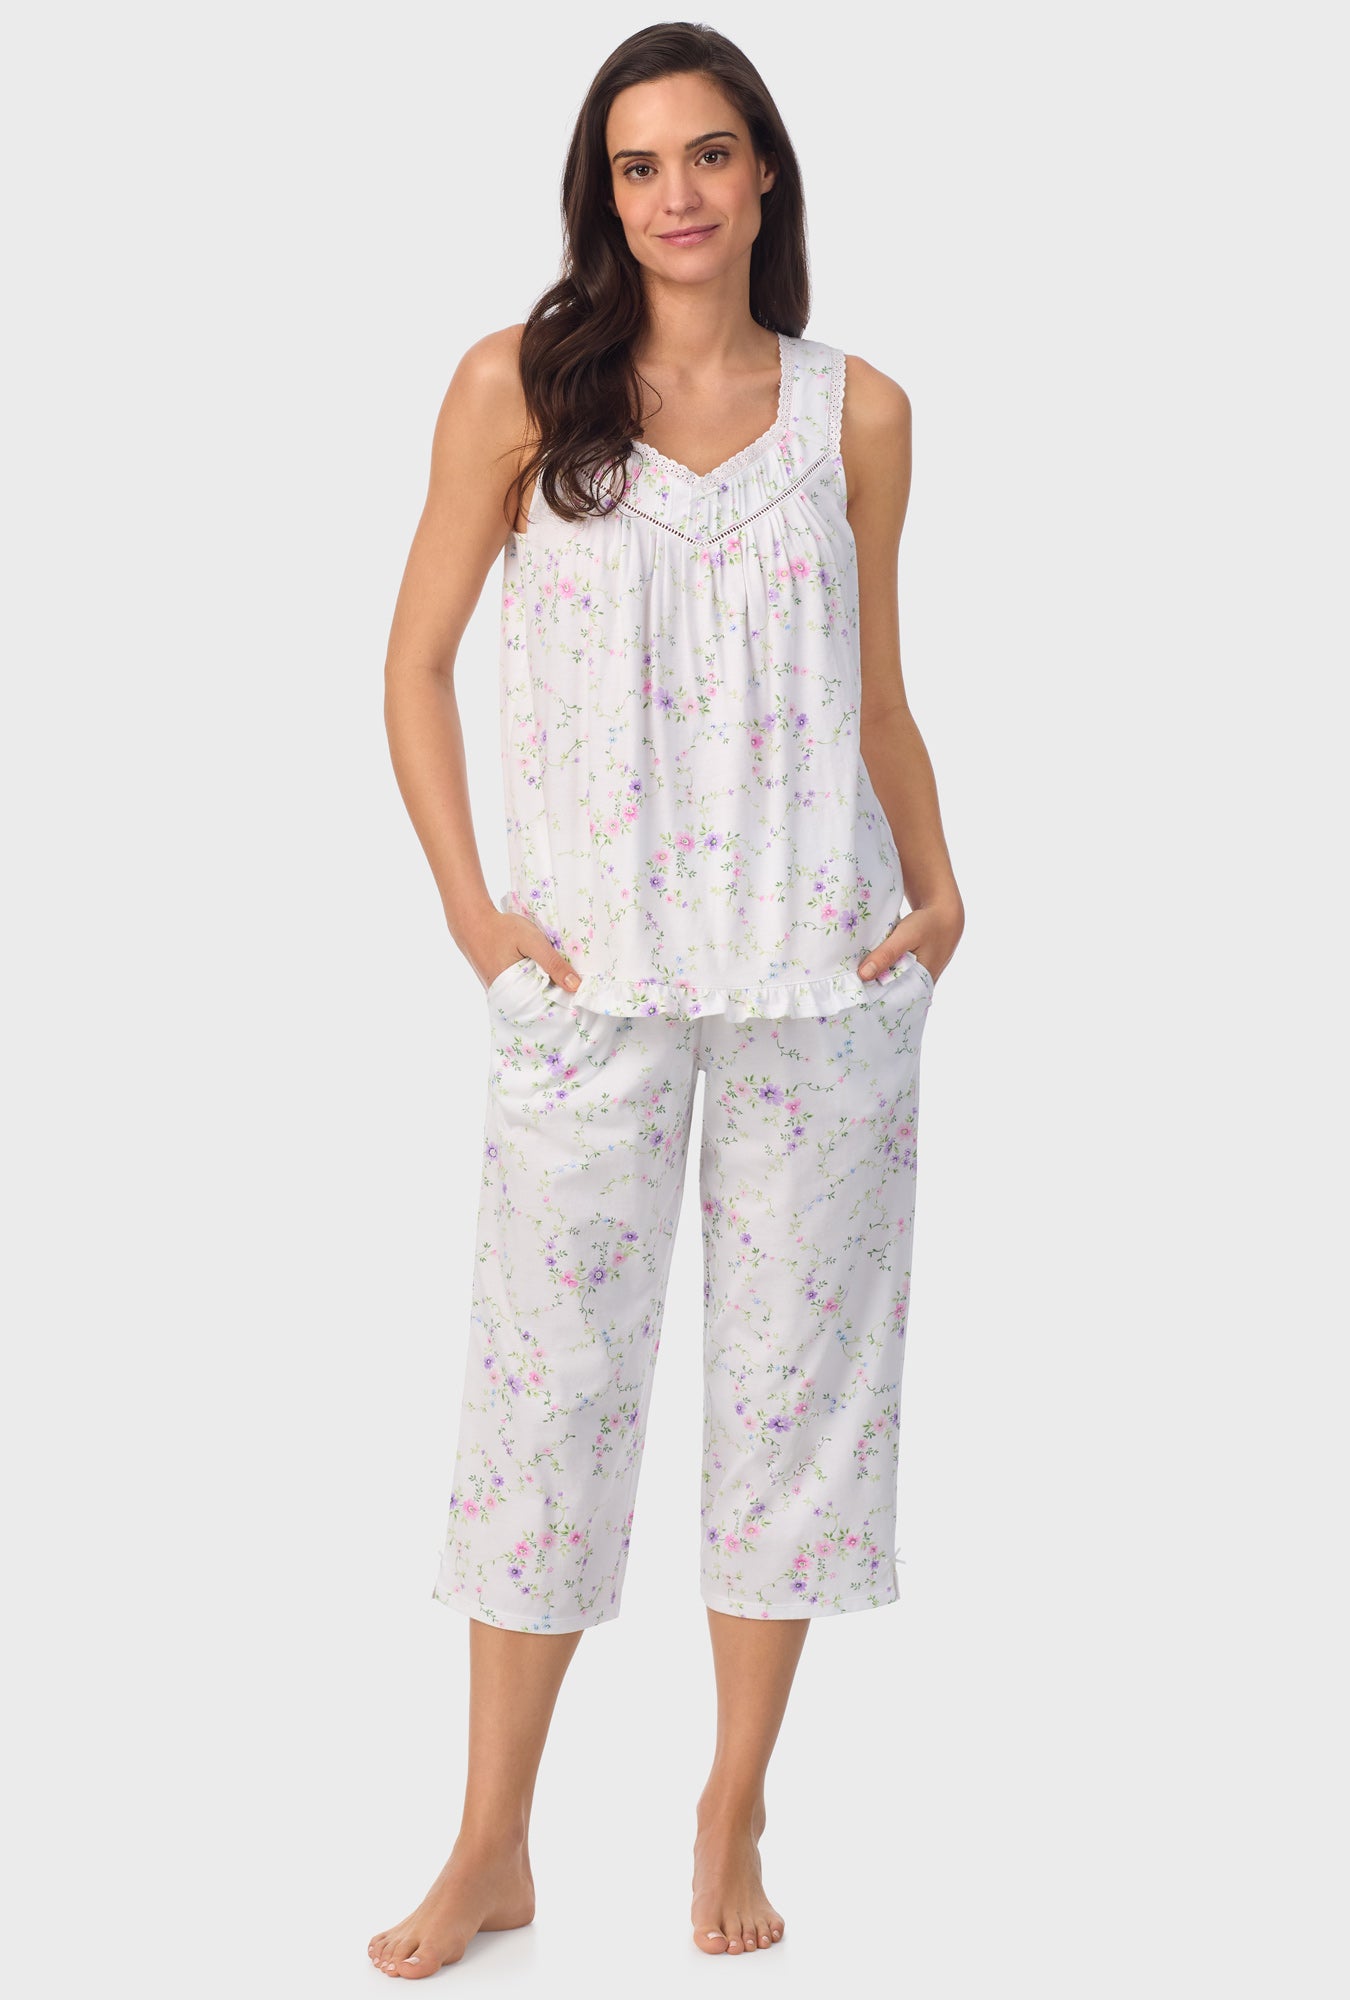 A lady wearing white sleeveless Viney Floral Sleeveless Capri Pant PJ Set with Lilac and Cherry Blossom print